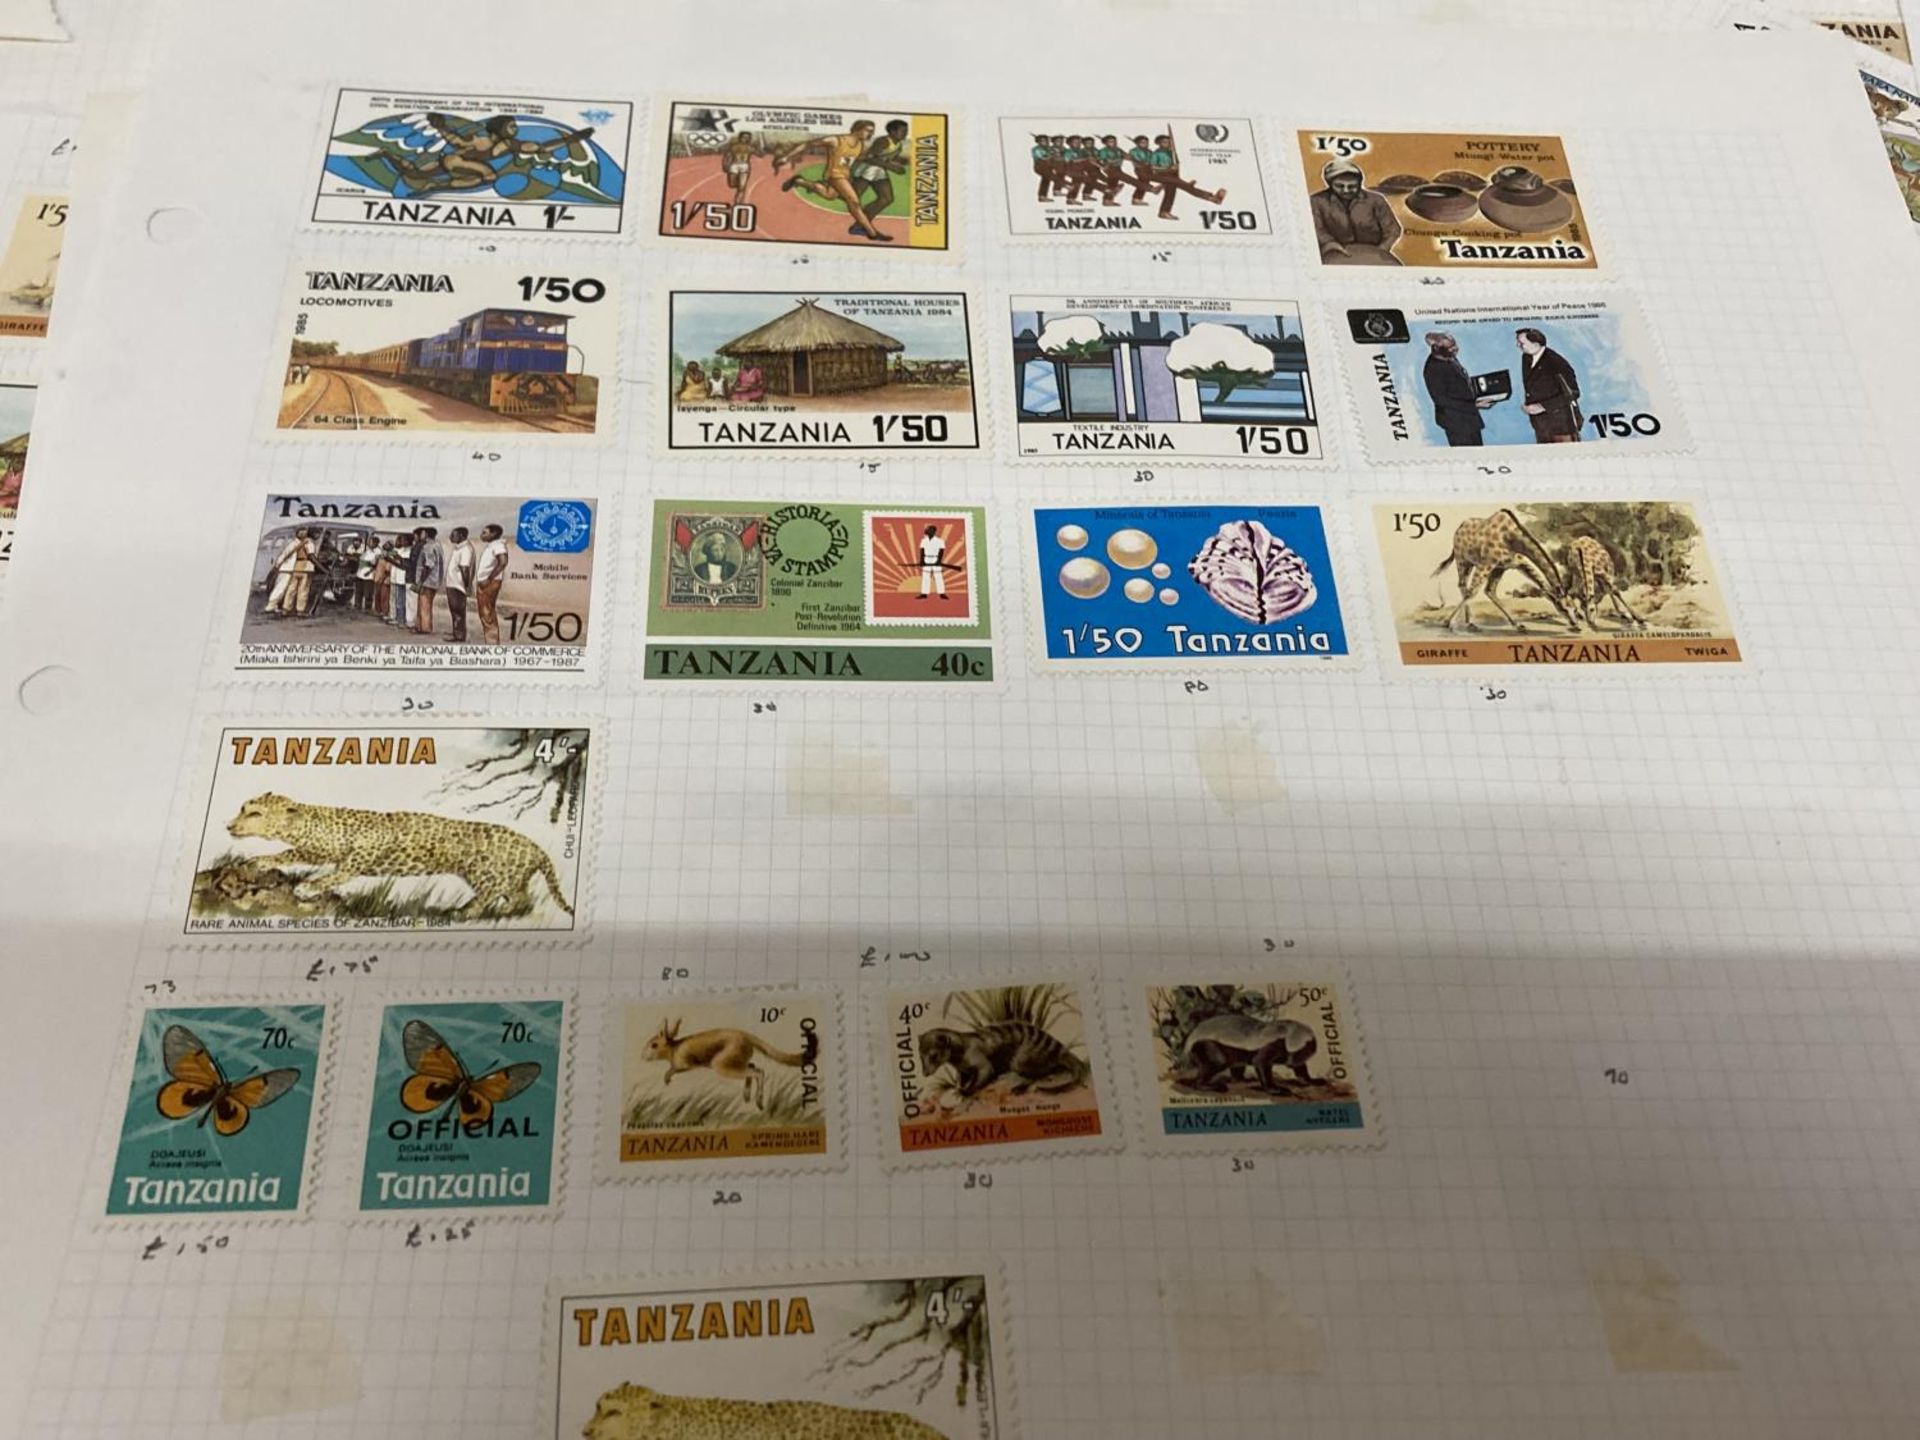 TEN PLUS SHEETS CONTAINING STAMPS FROM TANZANIA - Bild 4 aus 6